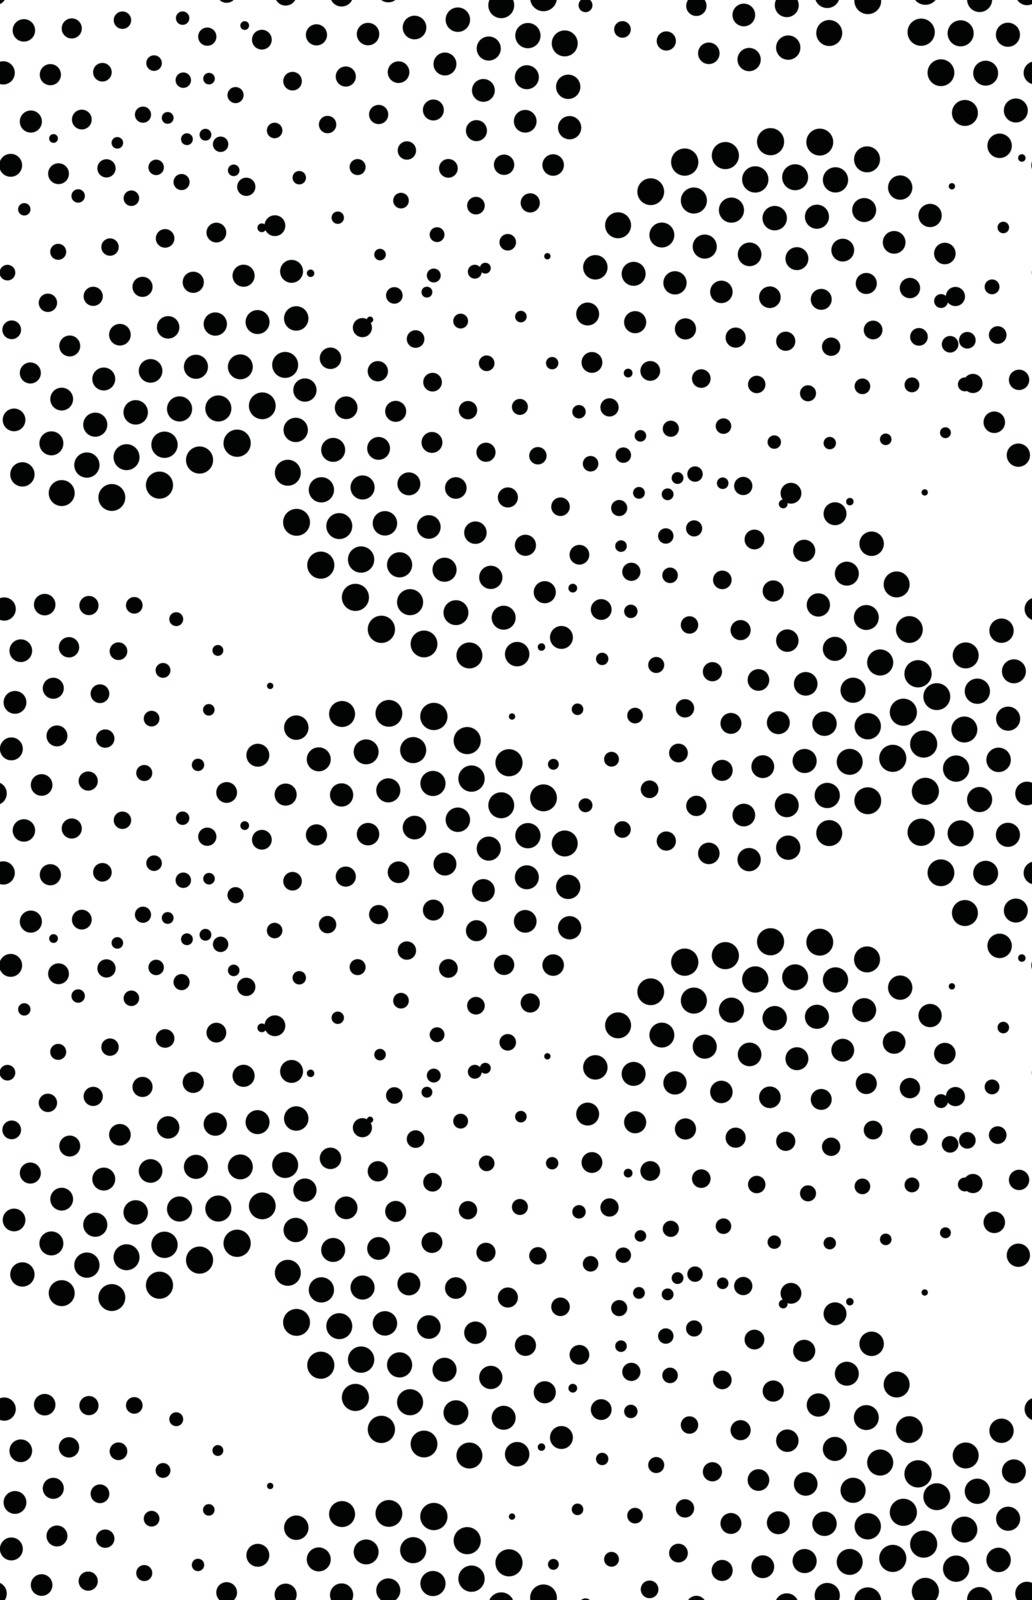 Vector geometric seamless pattern. Repeating abstract circles gradation in black and white. Modern halftone circle design, pointillism